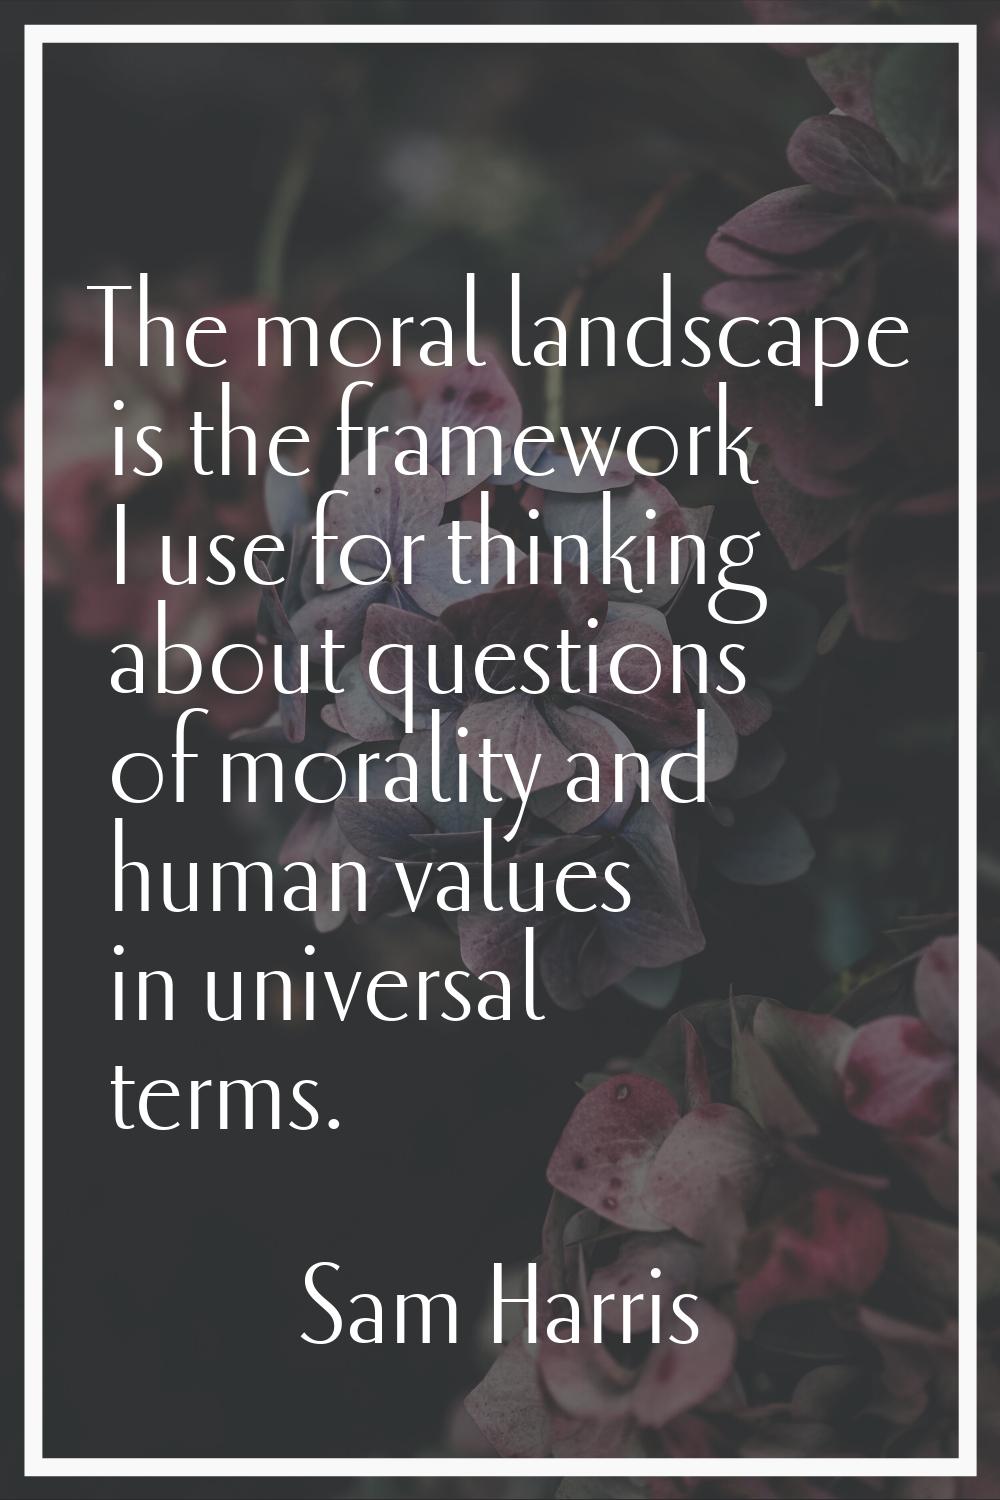 The moral landscape is the framework I use for thinking about questions of morality and human value